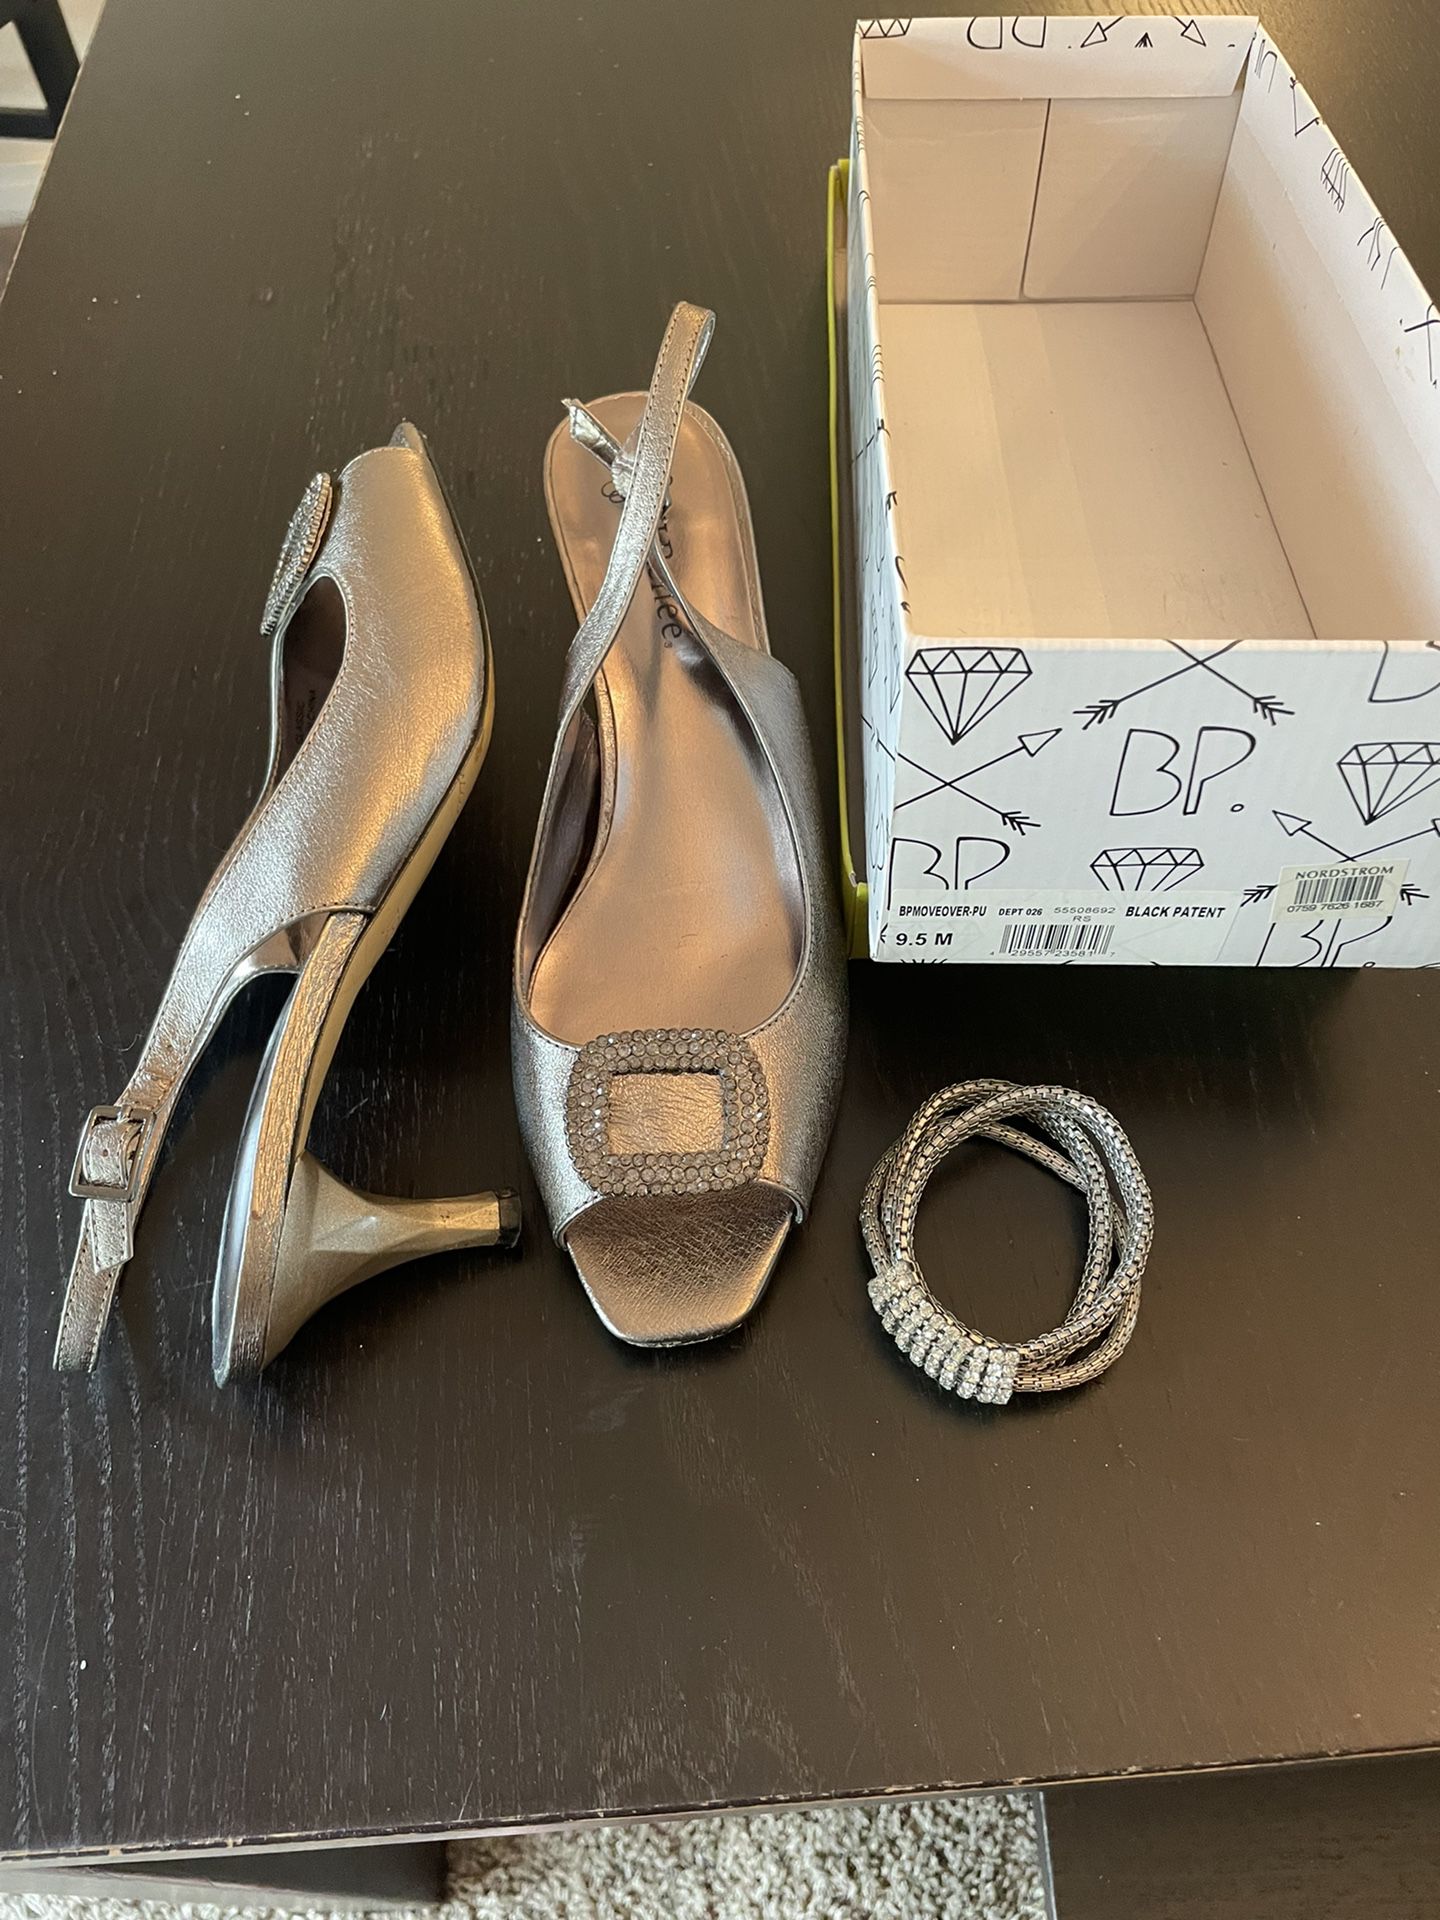 J Renee Silver Leather Shoes Size 9.5 With Matching Silver Bracelet